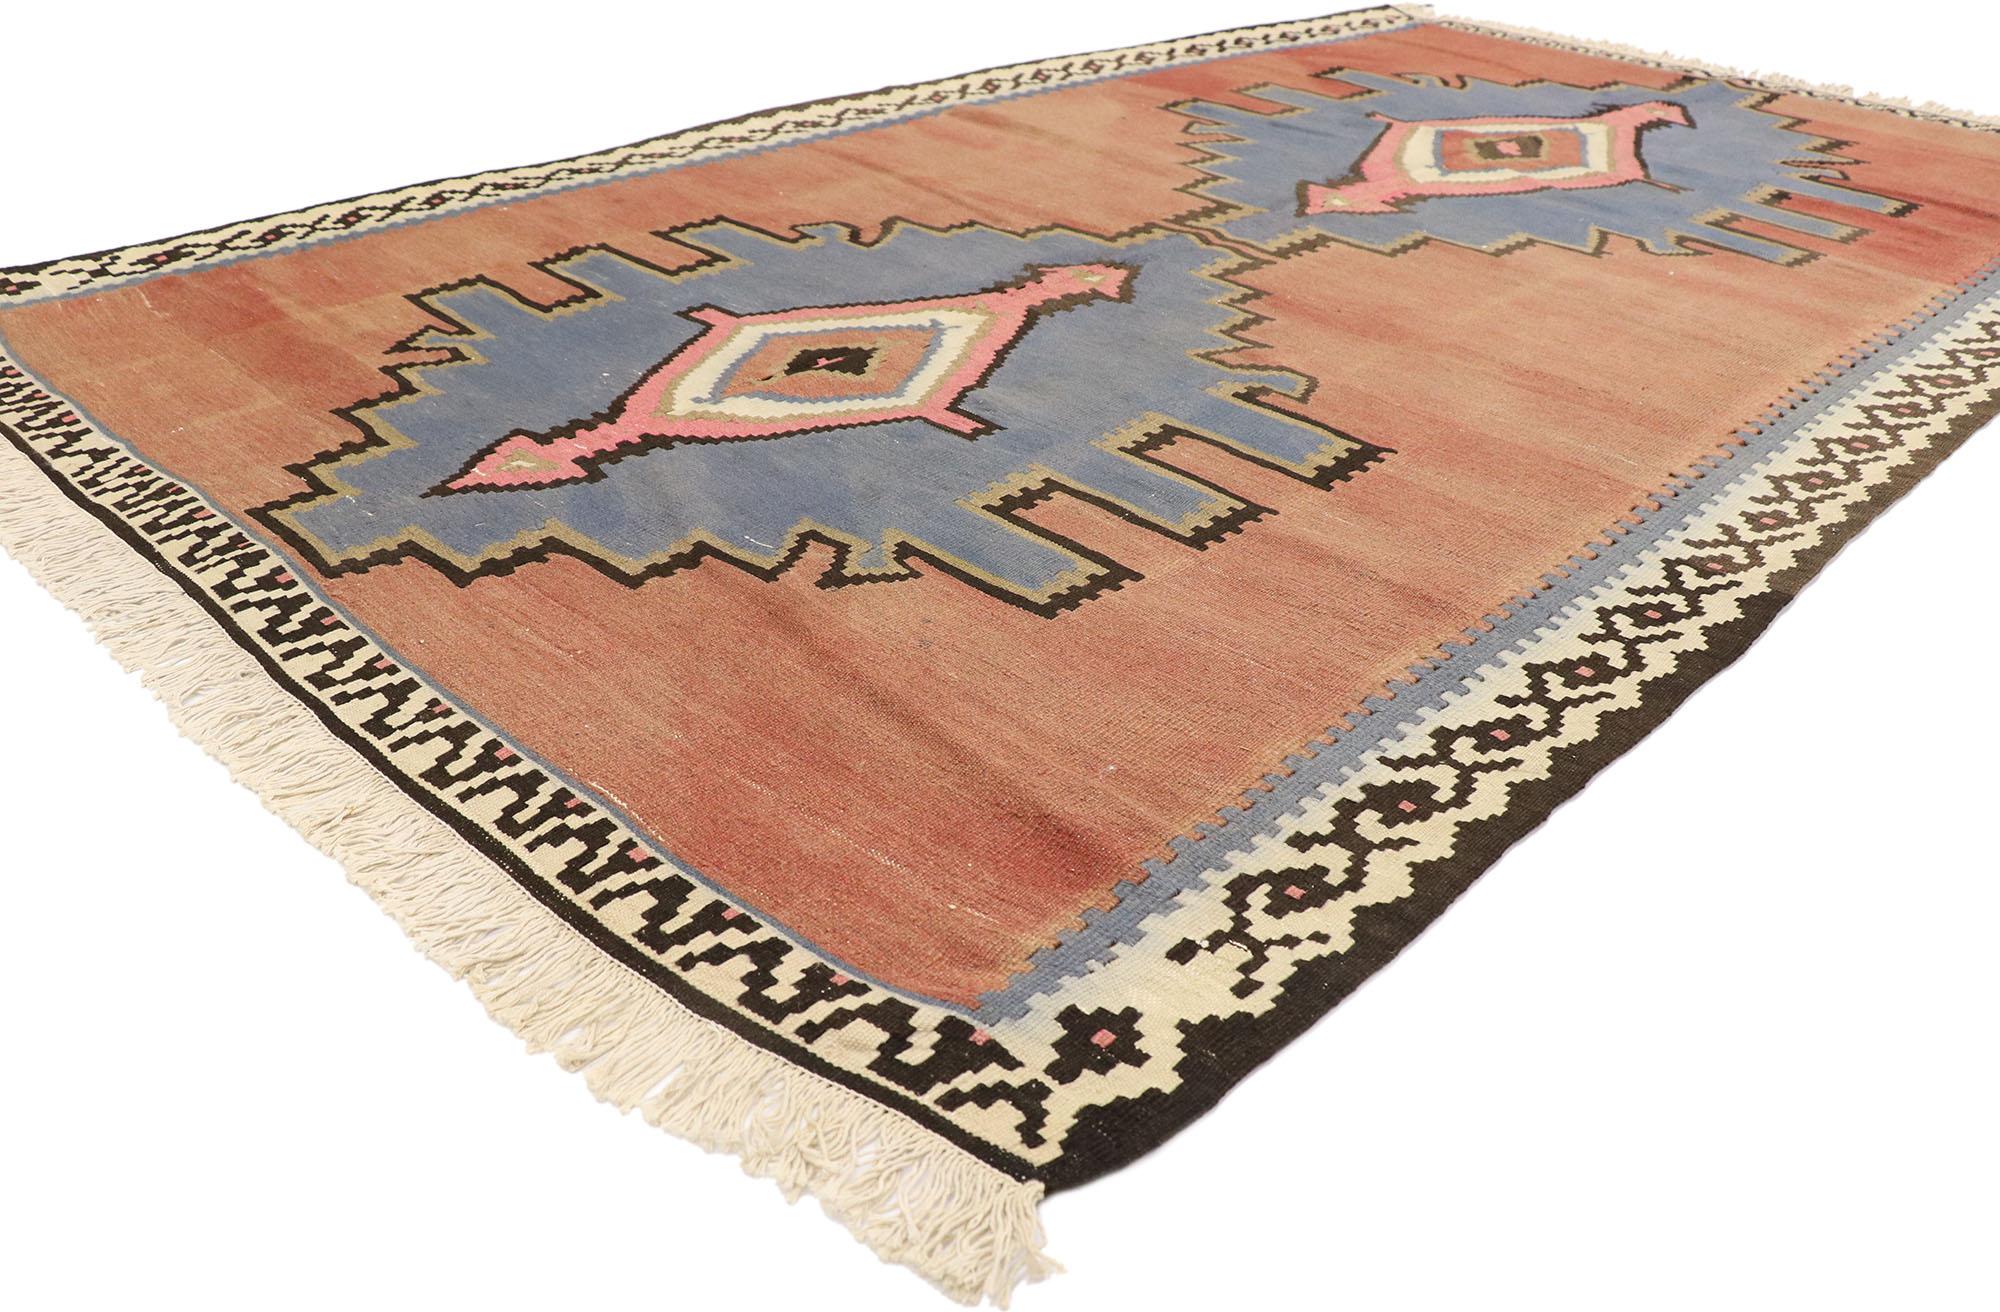 77953 Vintage Persian Bijar Kilim Rug, 05'05 x 09'03.
Embark on a captivating journey where modern boho chic converges seamlessly with the free-spirited allure of nomadic charm, intricately handwoven into the fabric of our vintage Persian Bijar